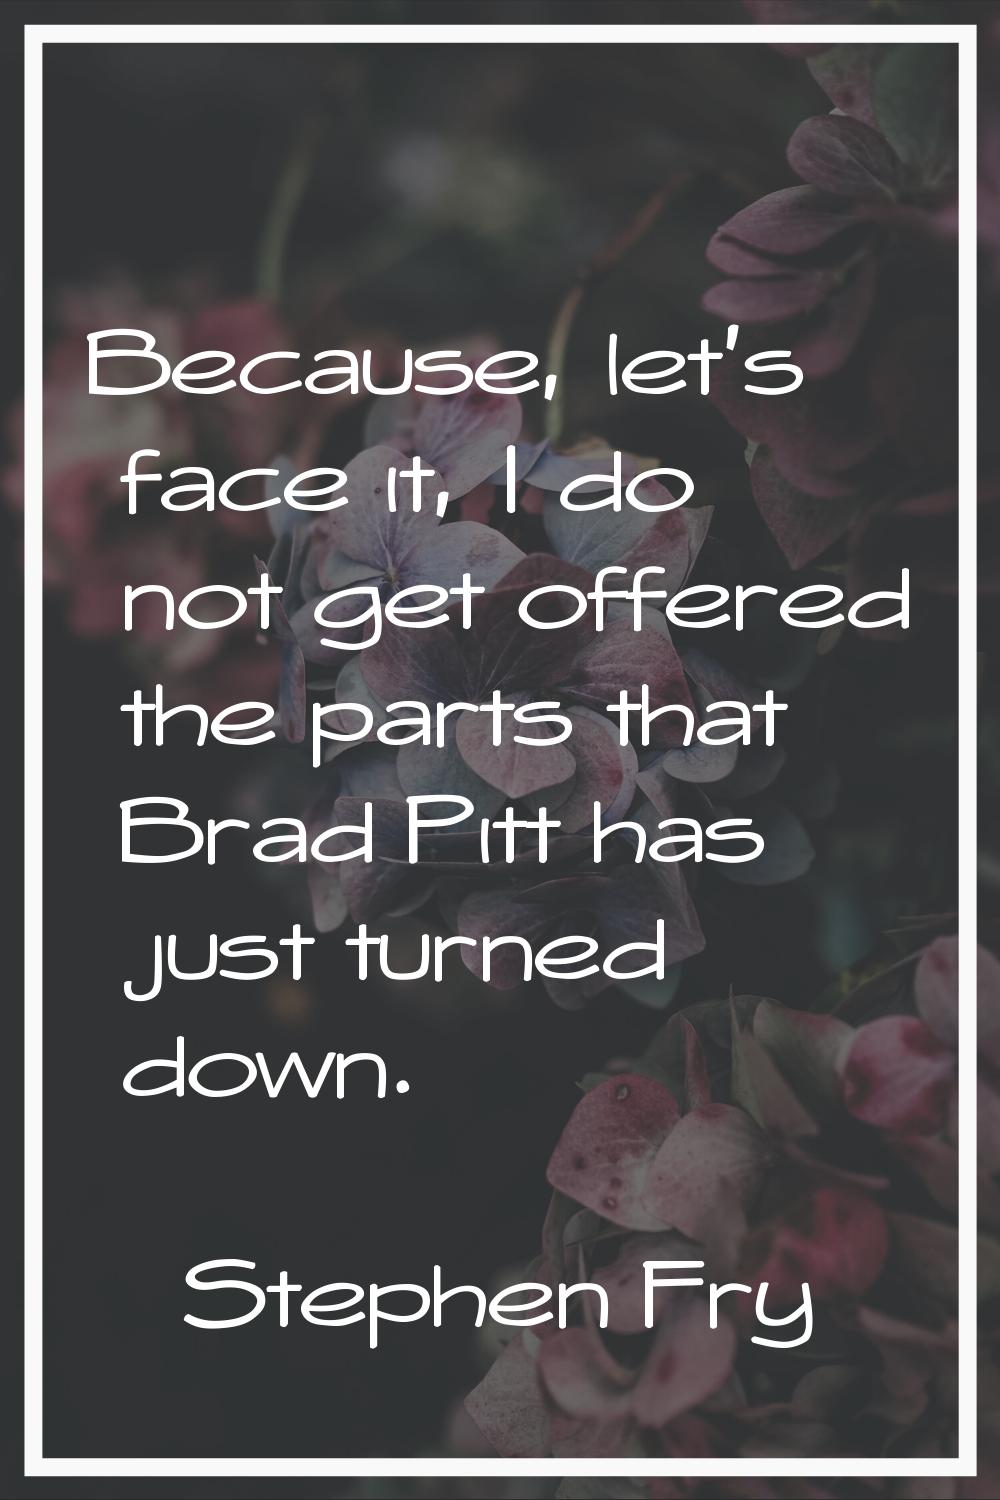 Because, let's face it, I do not get offered the parts that Brad Pitt has just turned down.